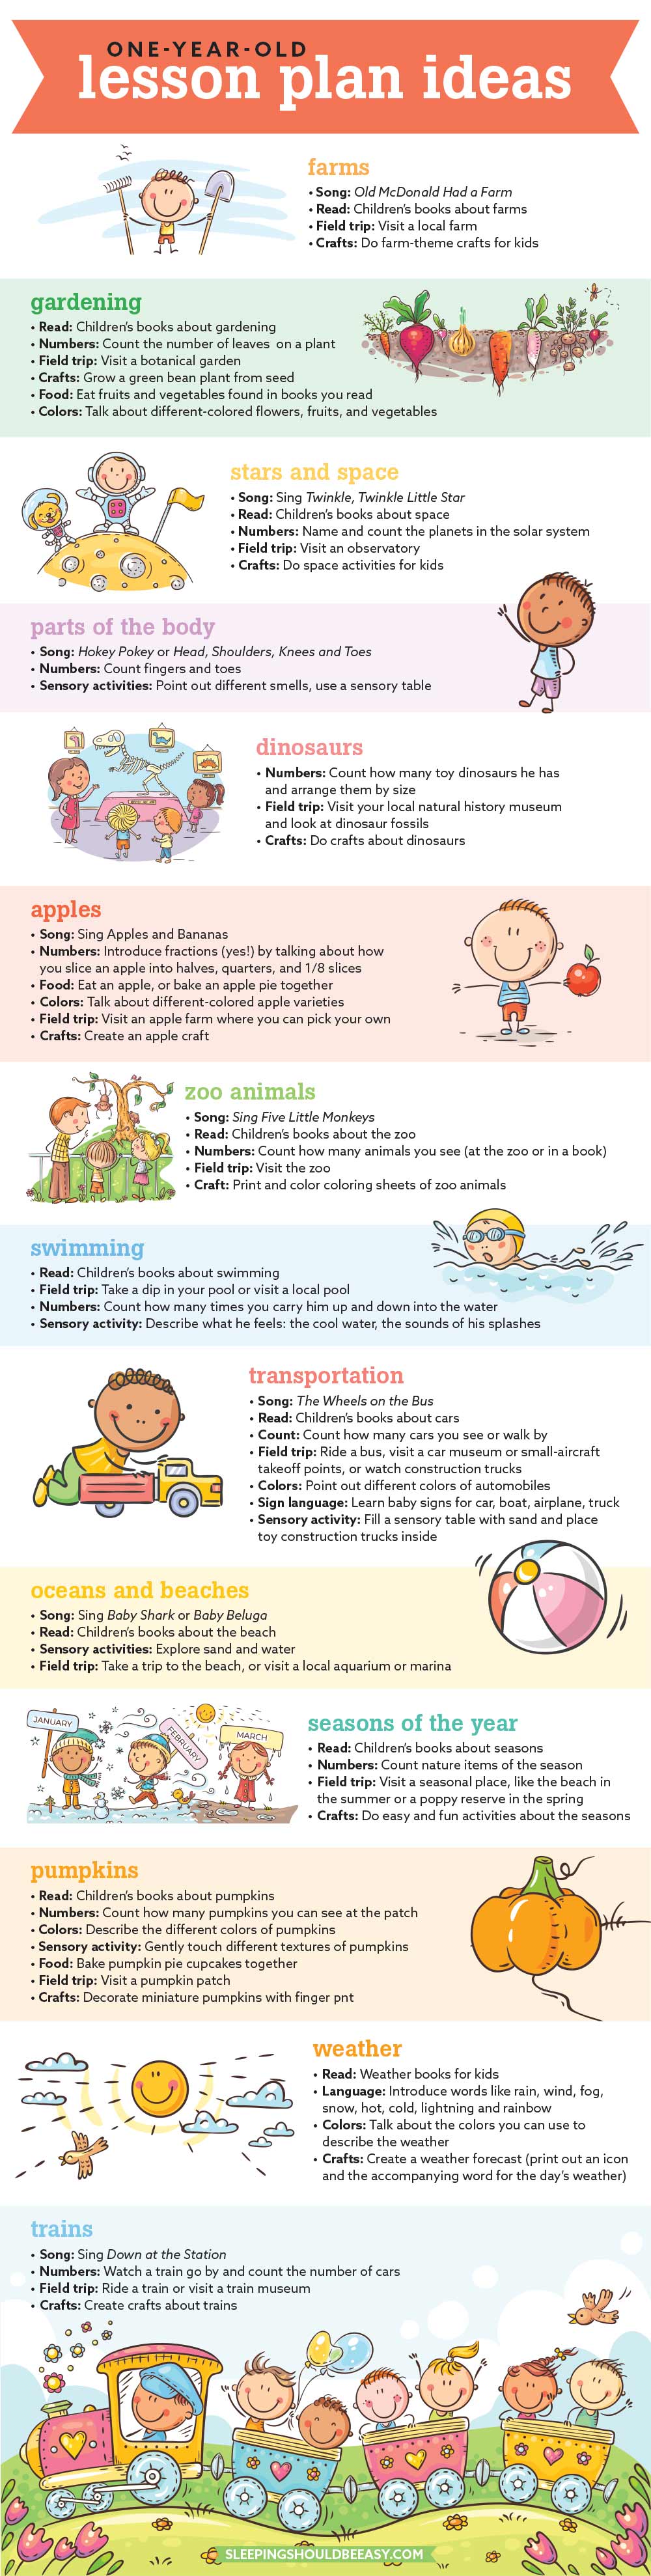 1 Year Old Lesson Plan Ideas infographic